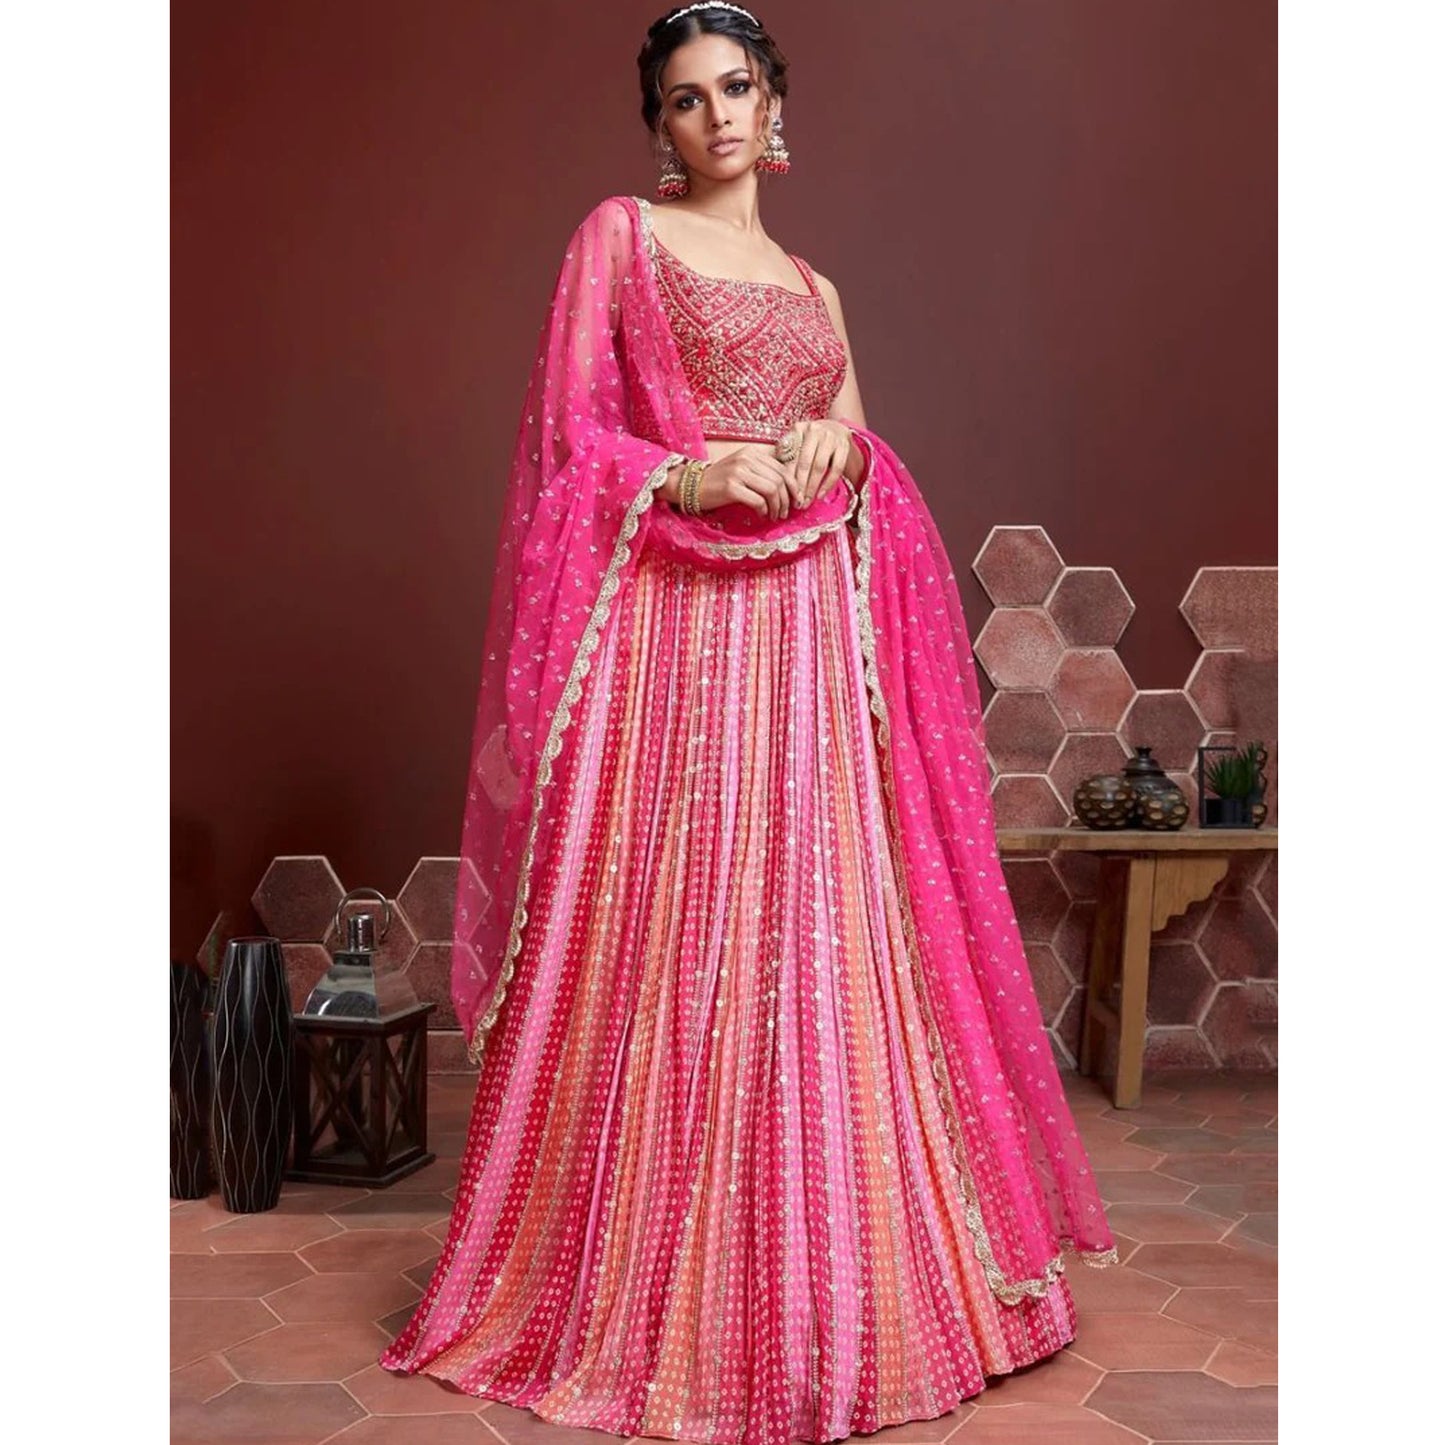 Ready To Wear Pink Ethnic Party Wear Designer Skirt for Women & Girl